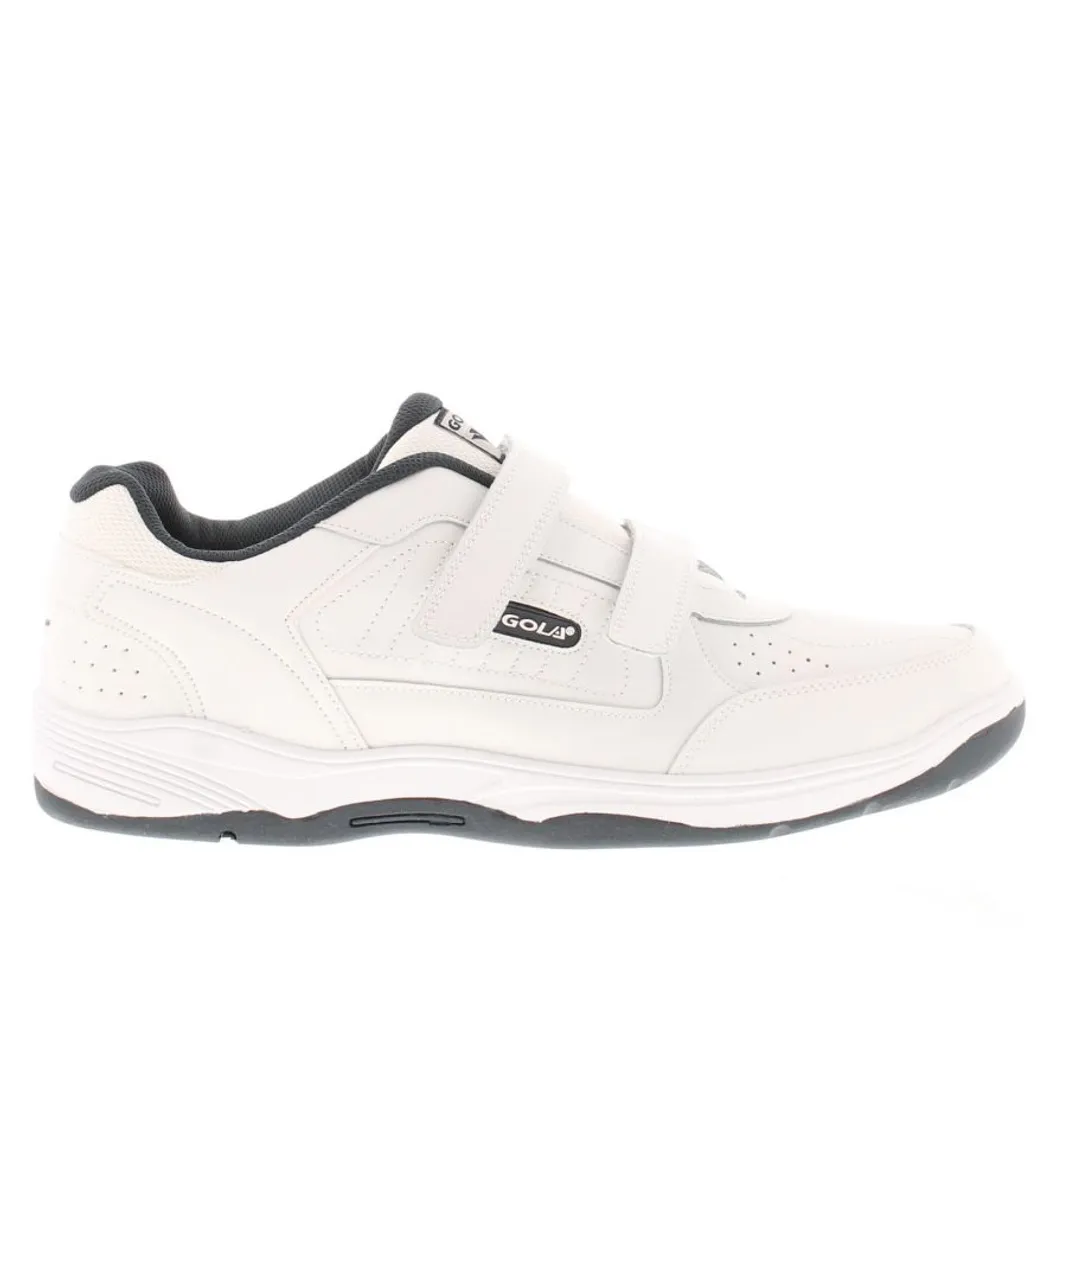 Gola Mens Trainers Belmont touch fastening Wide XL white Imitation Leather